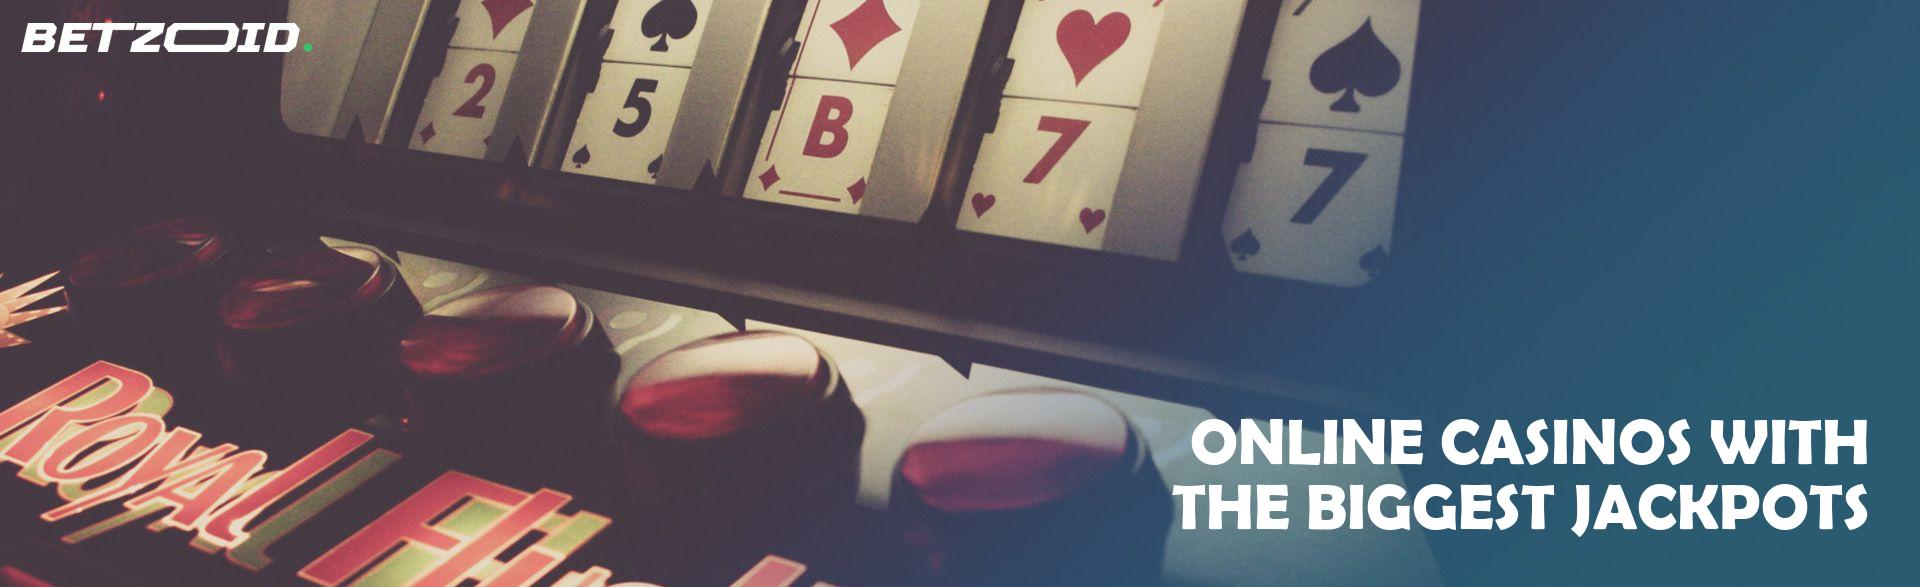 Online Casinos with the Biggest Jackpots.